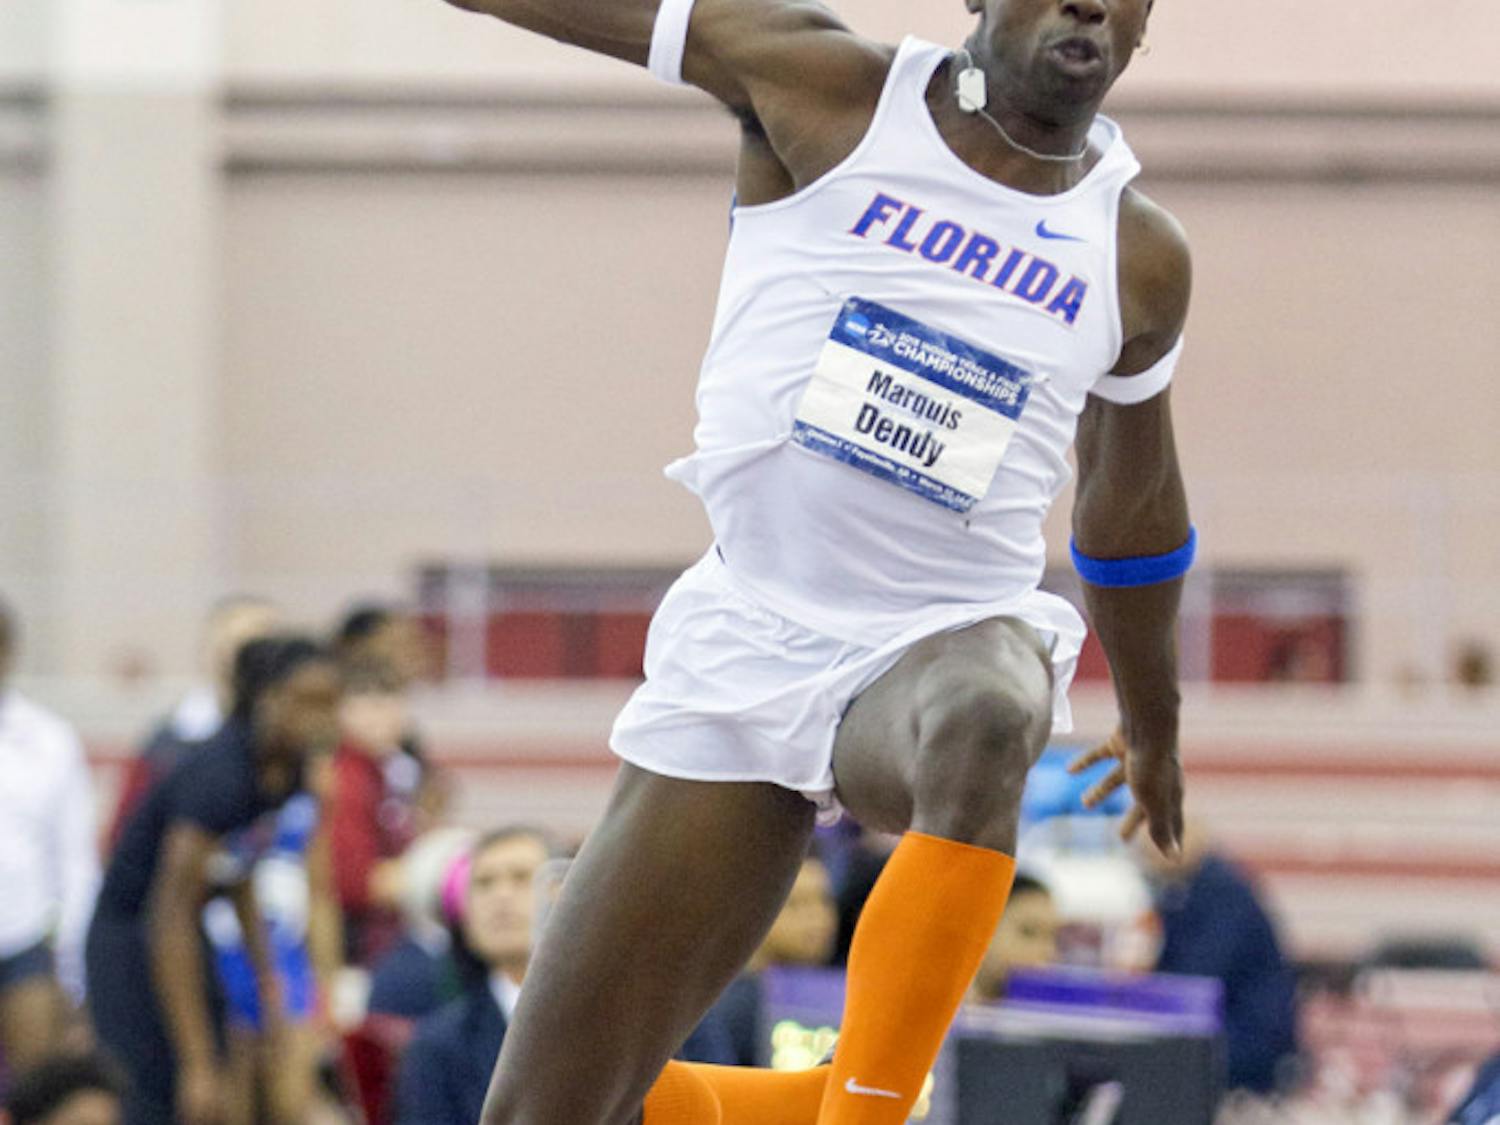 Marquis Dendy competes in the triple jump during the 2015 NCAA Indoor Championships on March 14 in Fayetteville, Arkansas.